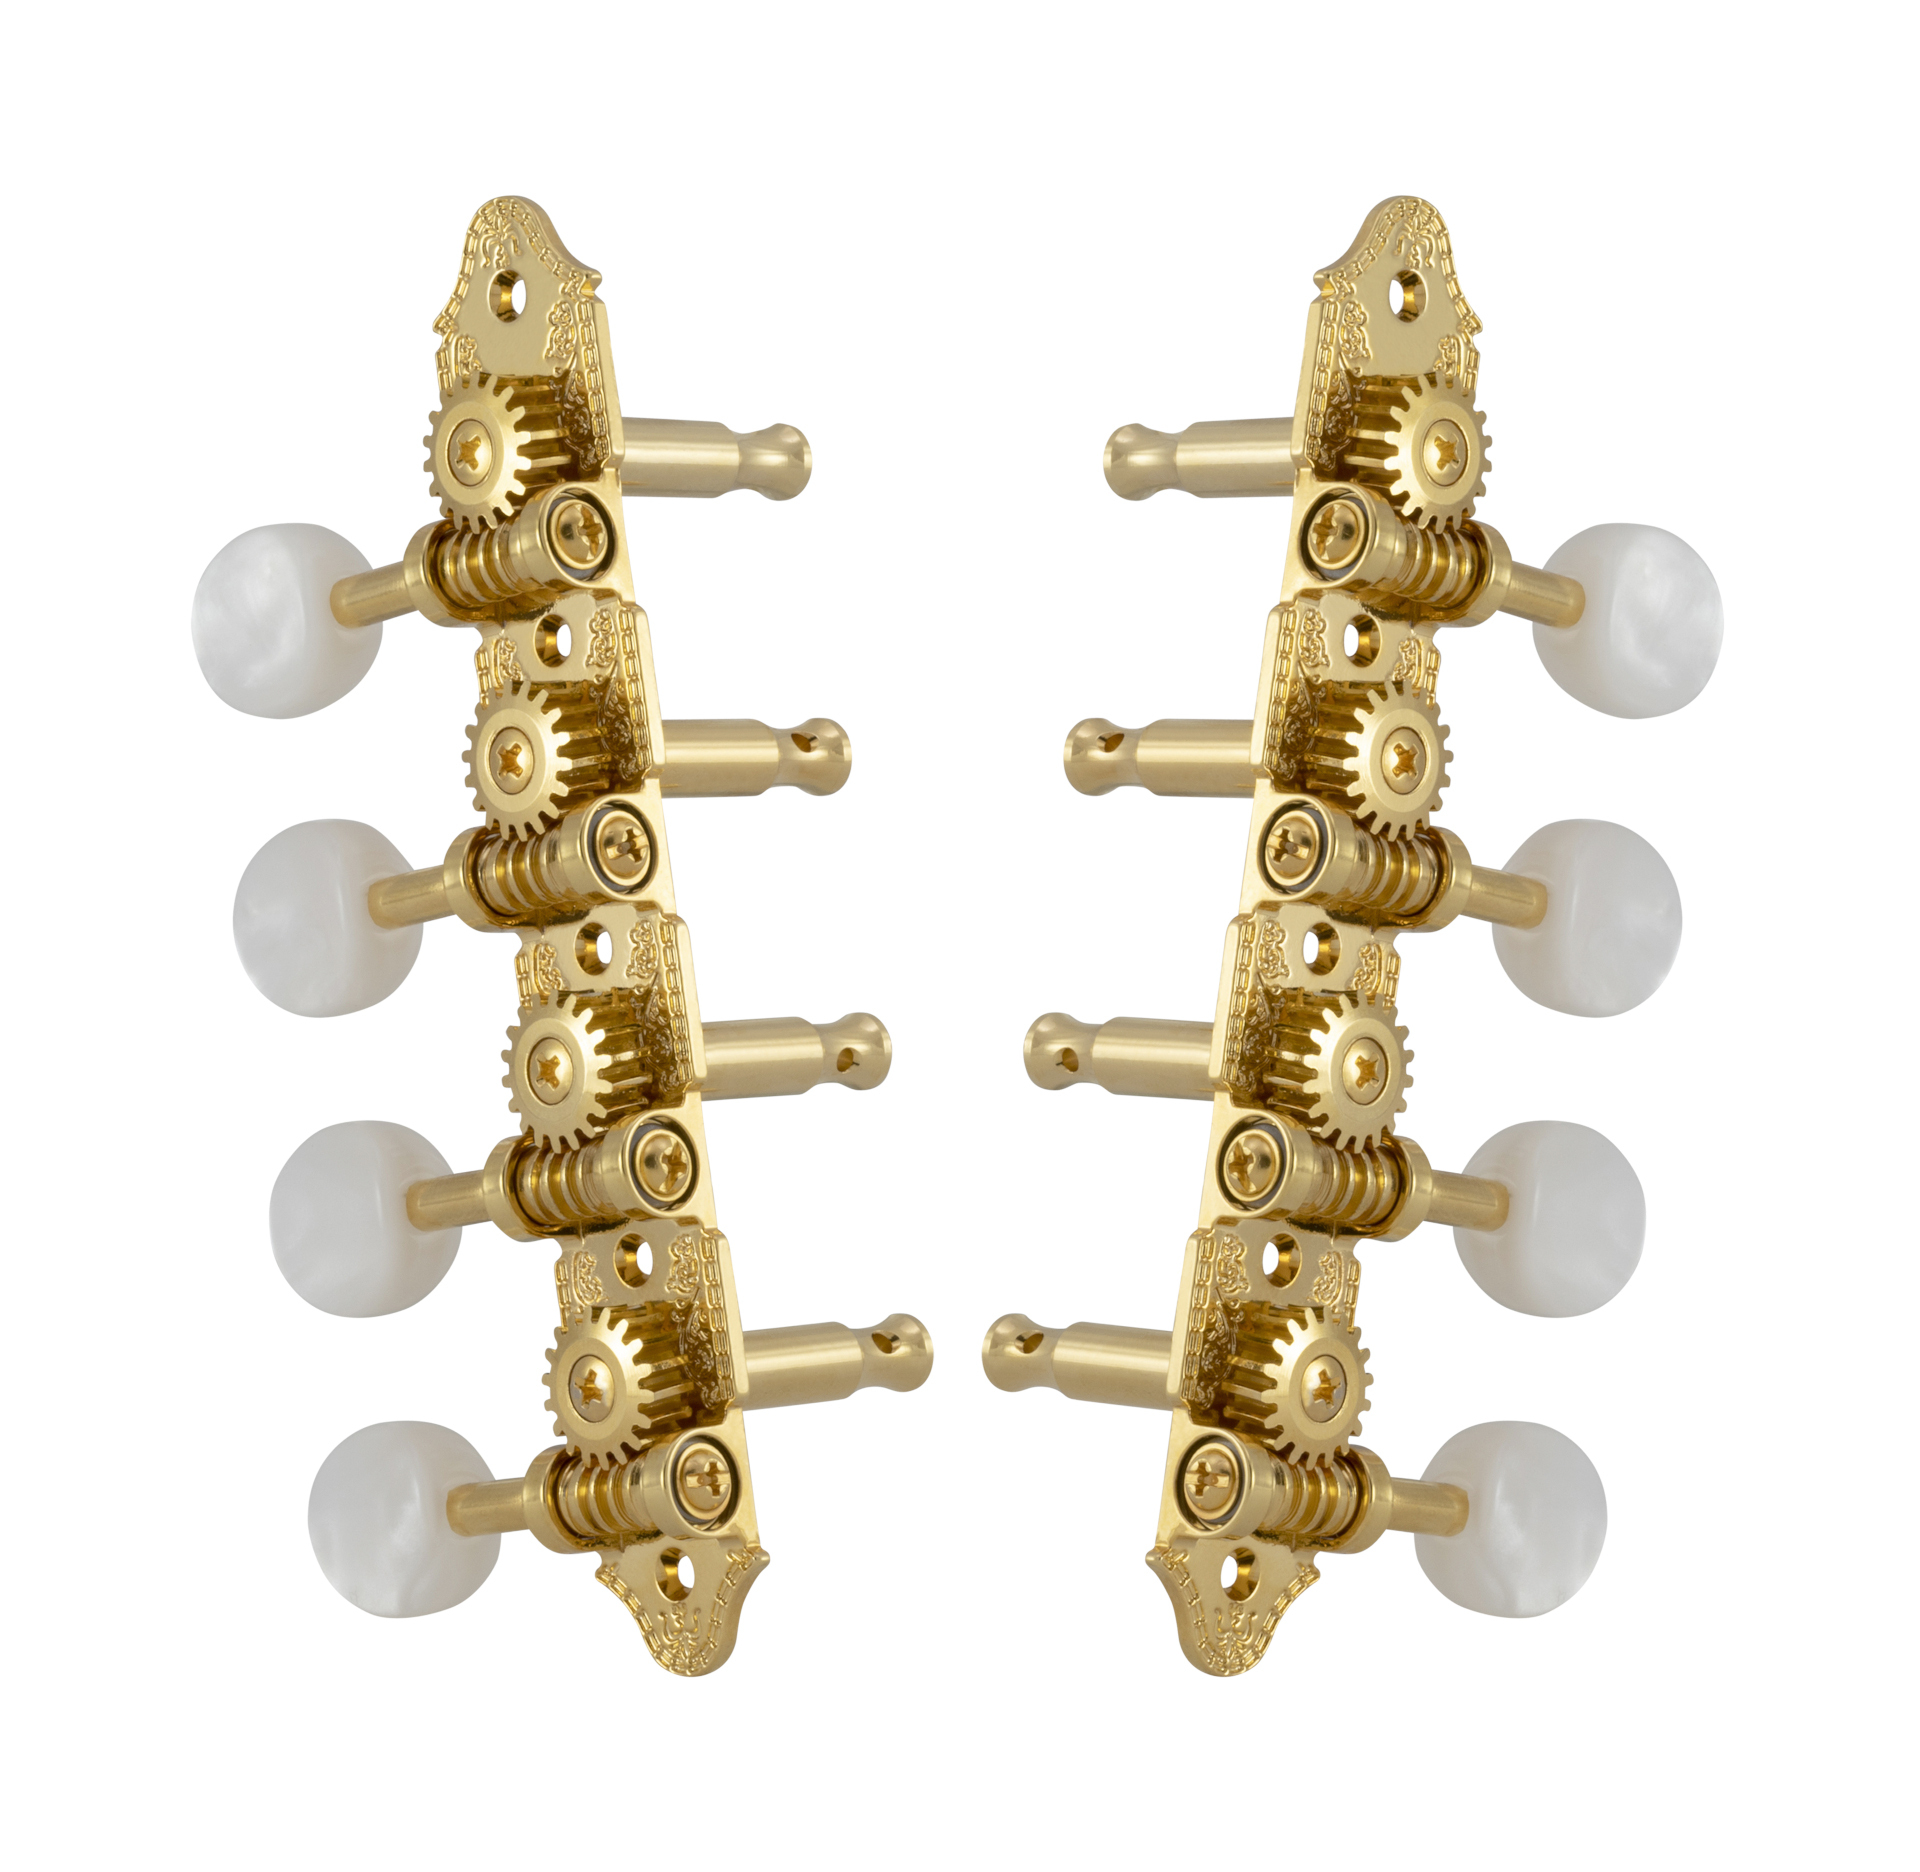 Grover 409VG Professional Mandolin Machines with Pearloid Button - Mandolin Machine Heads, Standard 4 + 4, for "A"-Style Mandolins - Gold